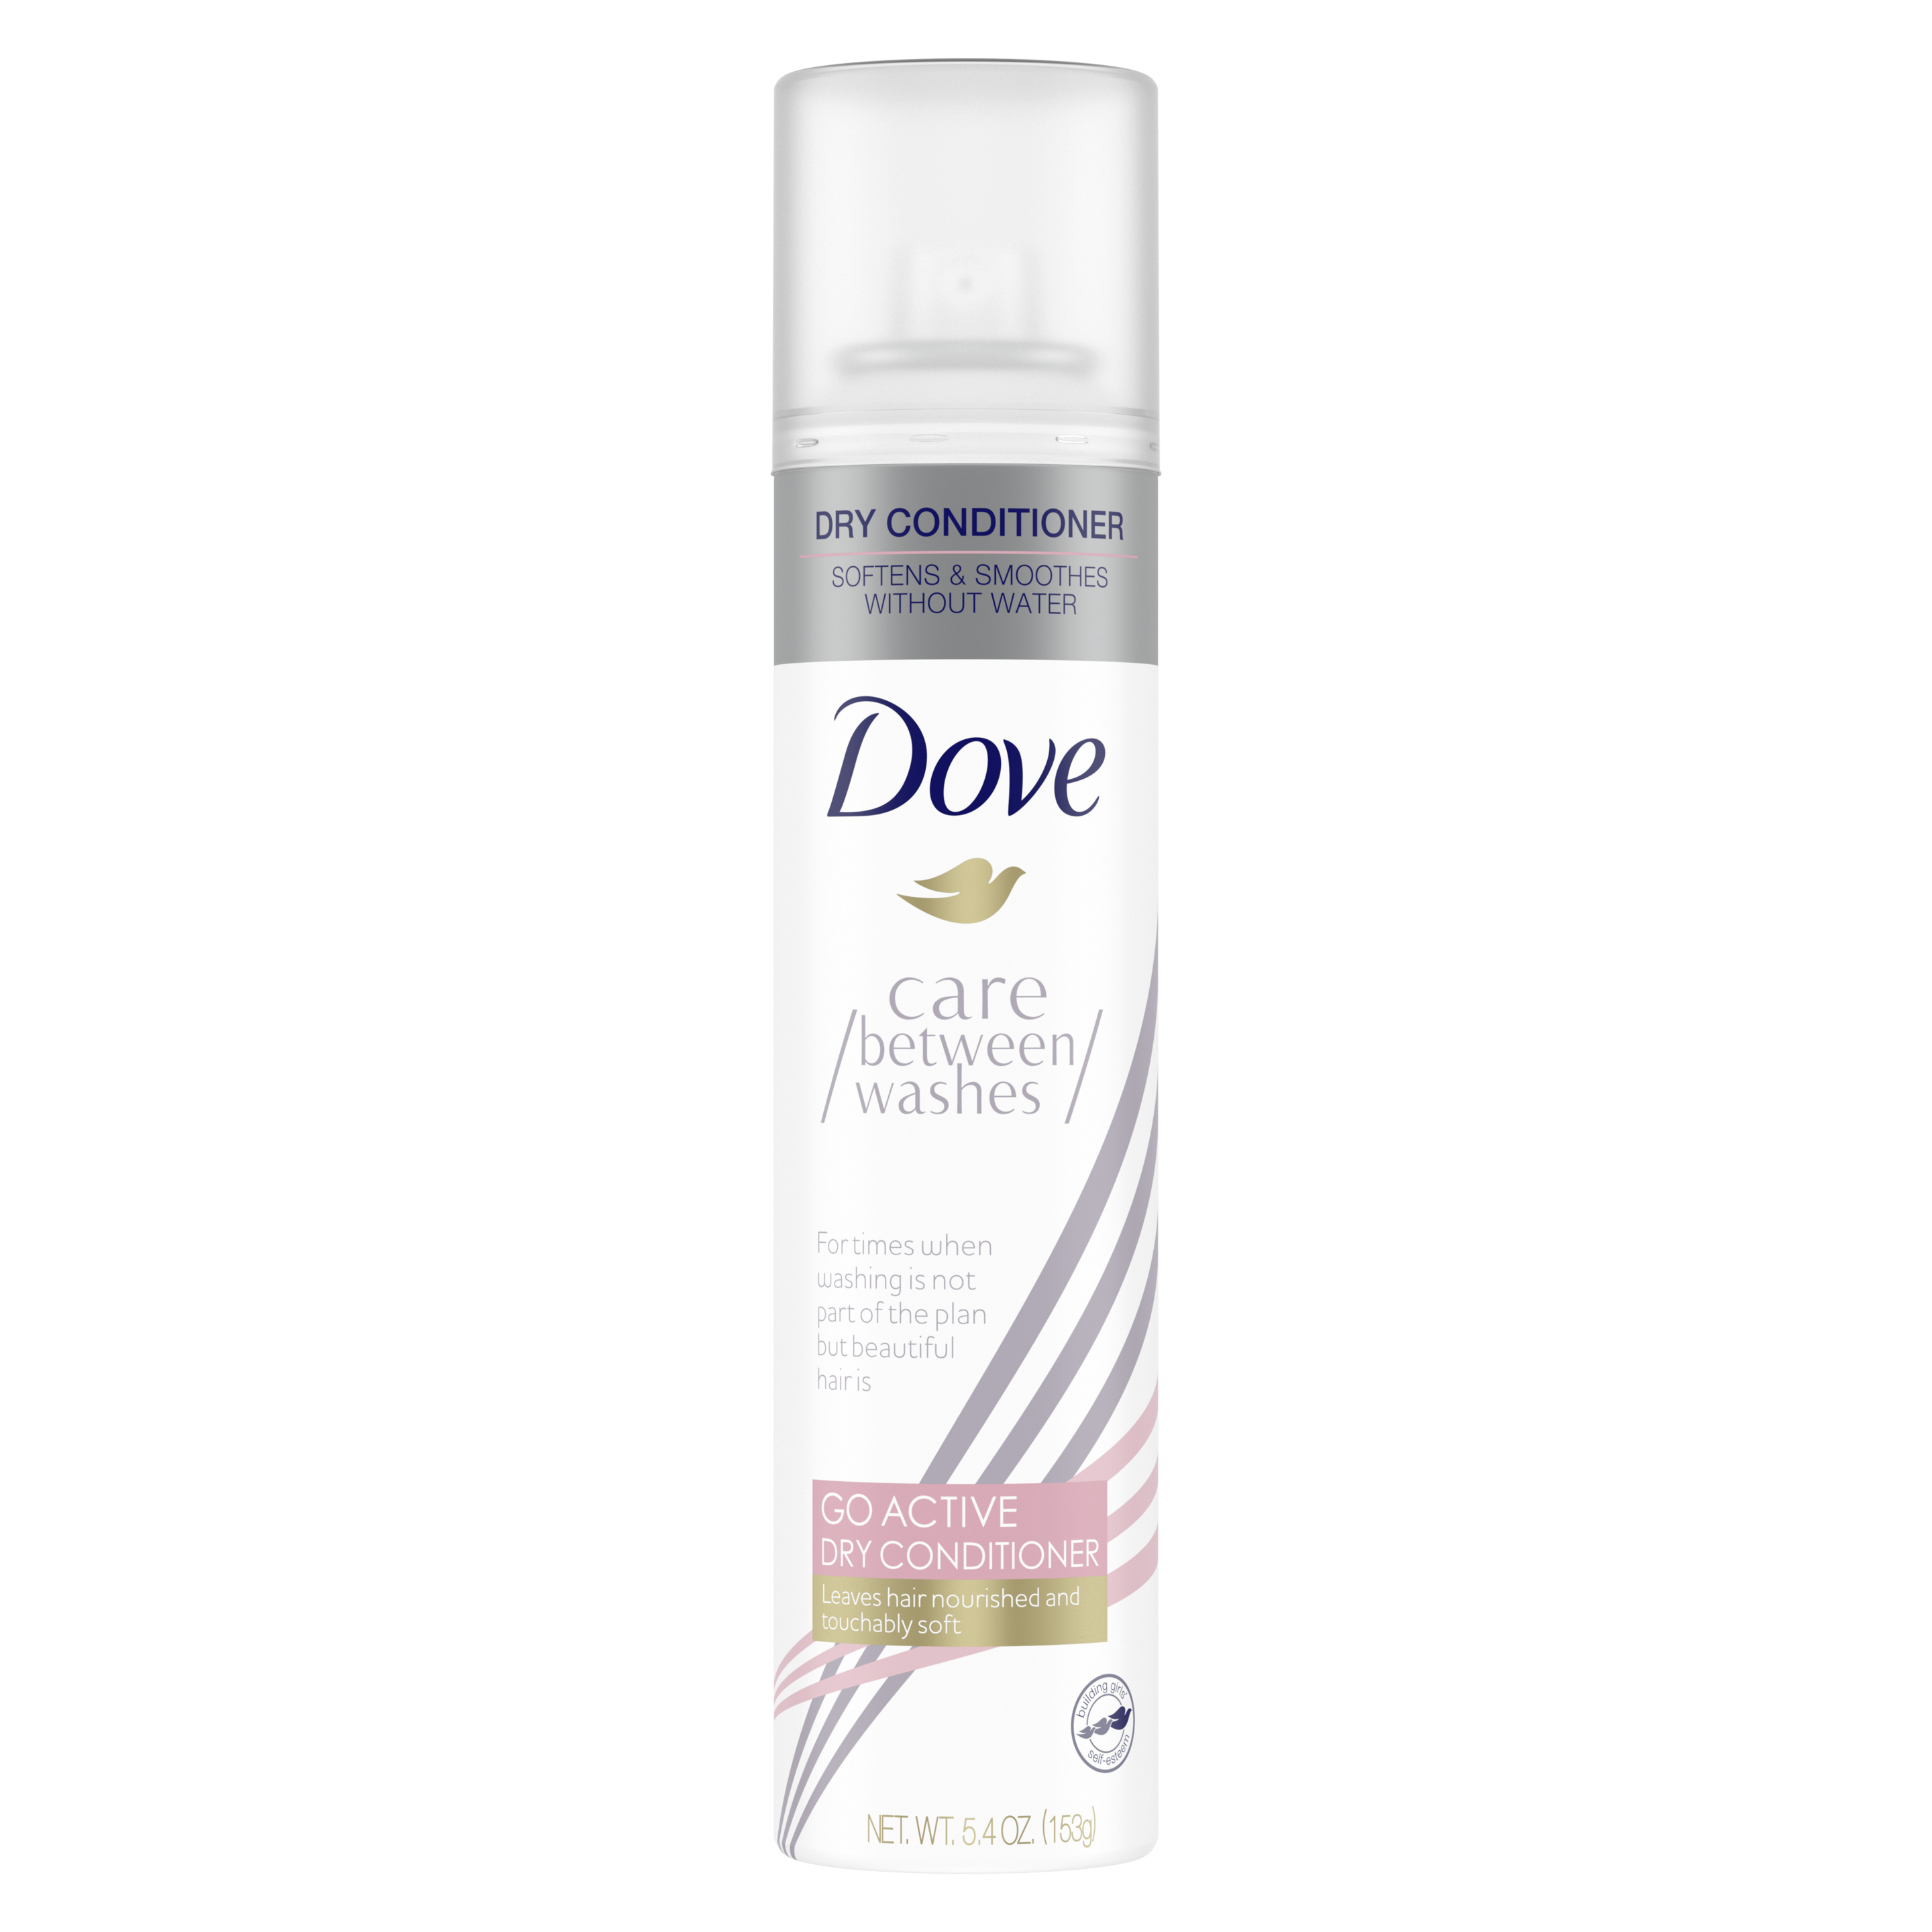 Dove Care Between Washes Go Active Dry Conditioner 5.42oz